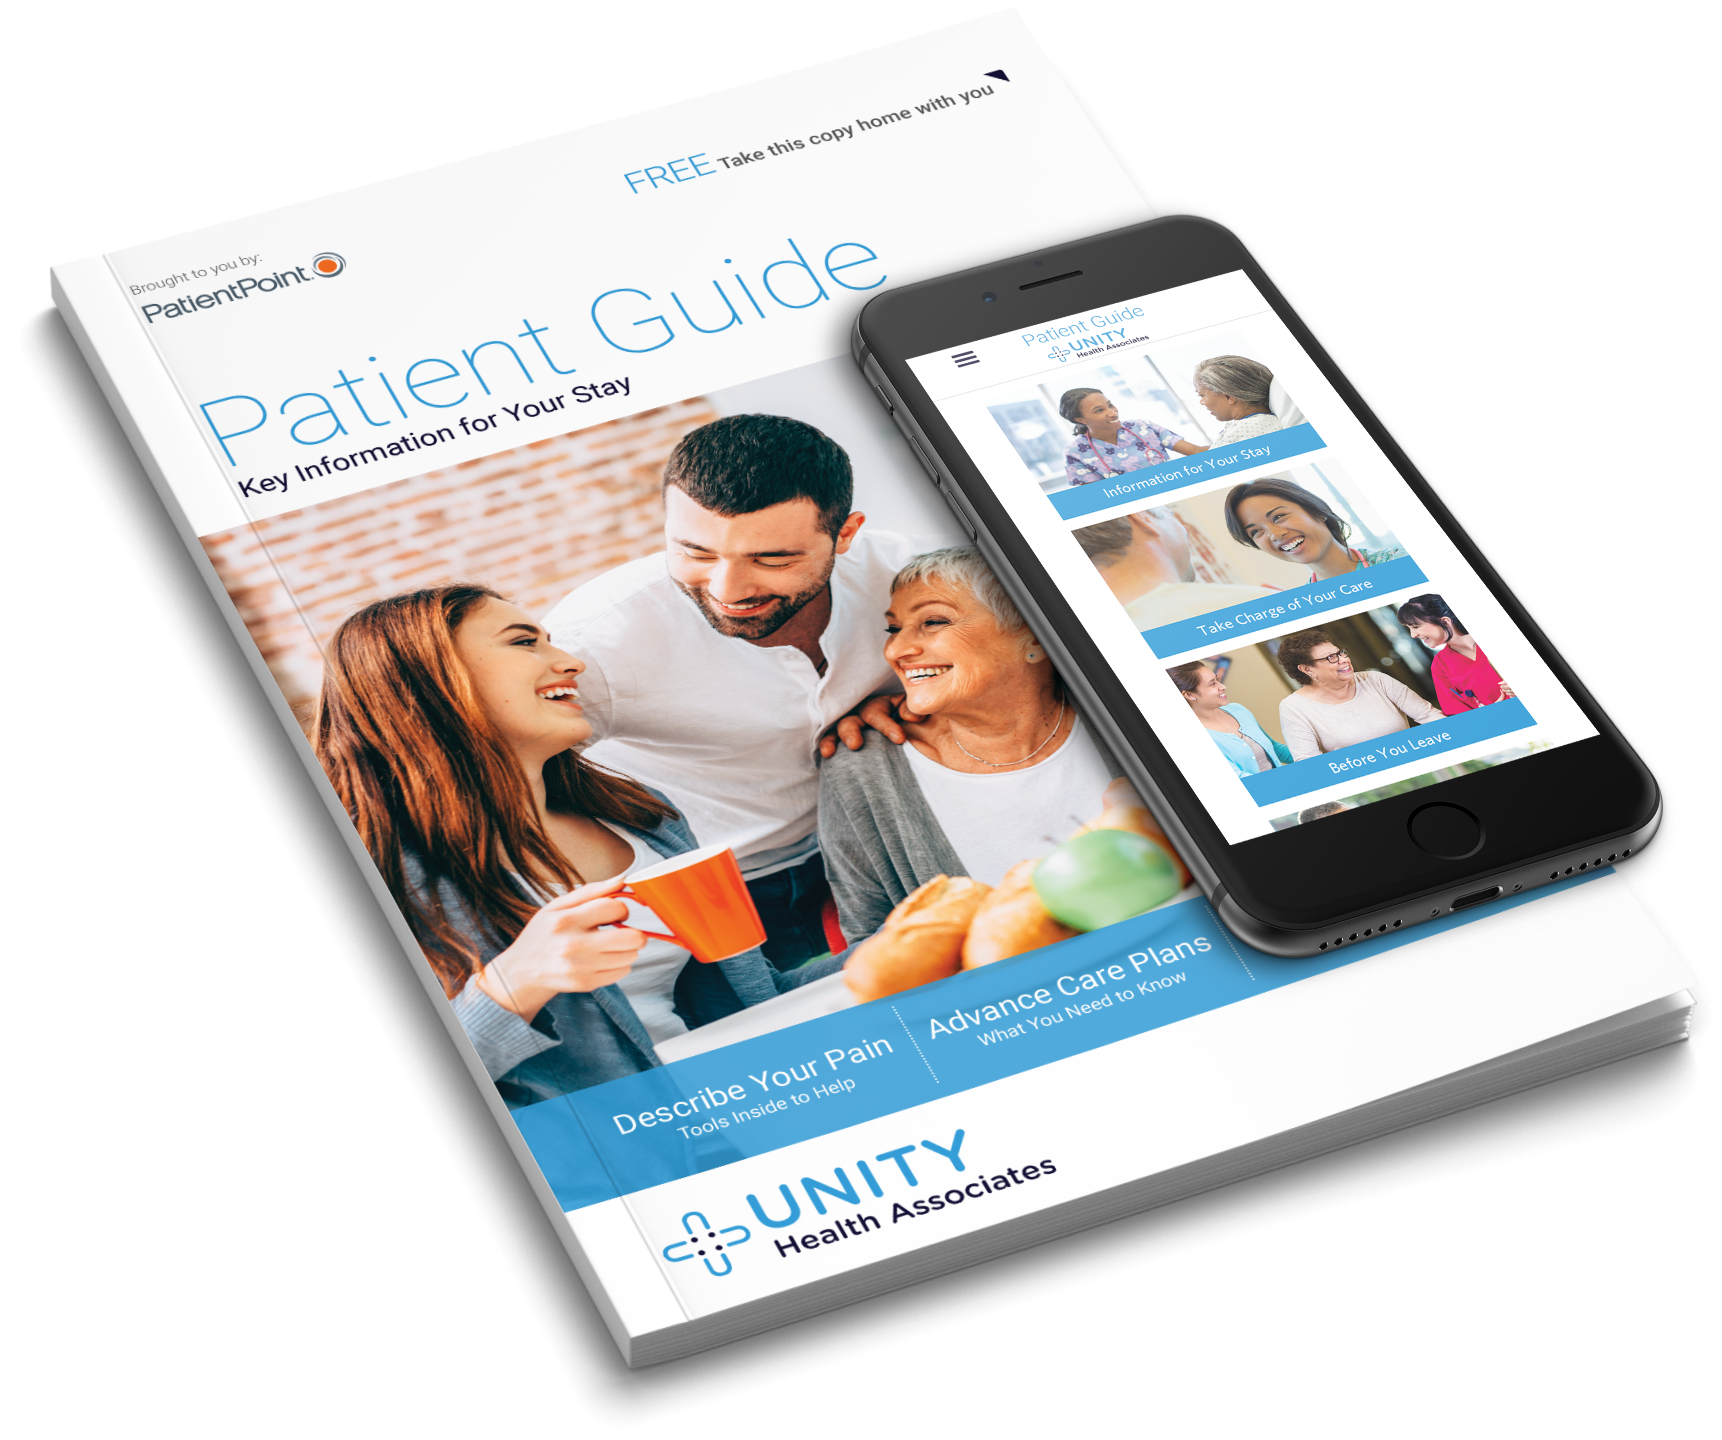 PatientPoint hospital patient guide booklet and a mobile phone displaying a digital version of the patient guide.